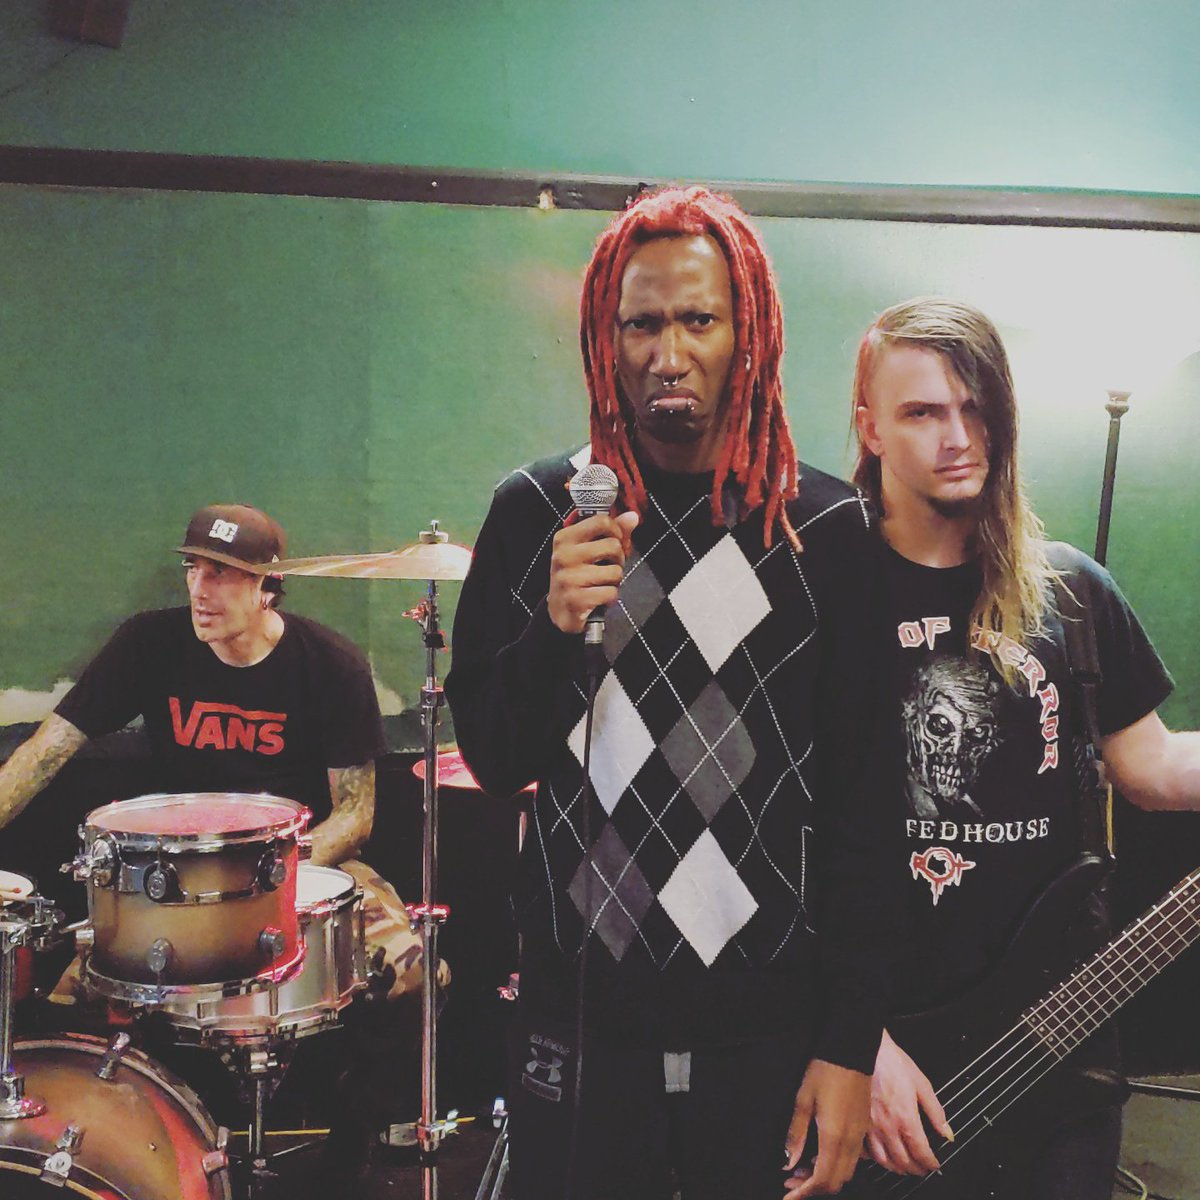 First time we've rehearsed since before Halloween. It feels so good to be back with the boys. (pls follow us on Spotify we got some new gucci shit coming out soon)

_______
#midnightnightmare 
#nightmaregang 
#midnightnightmareband